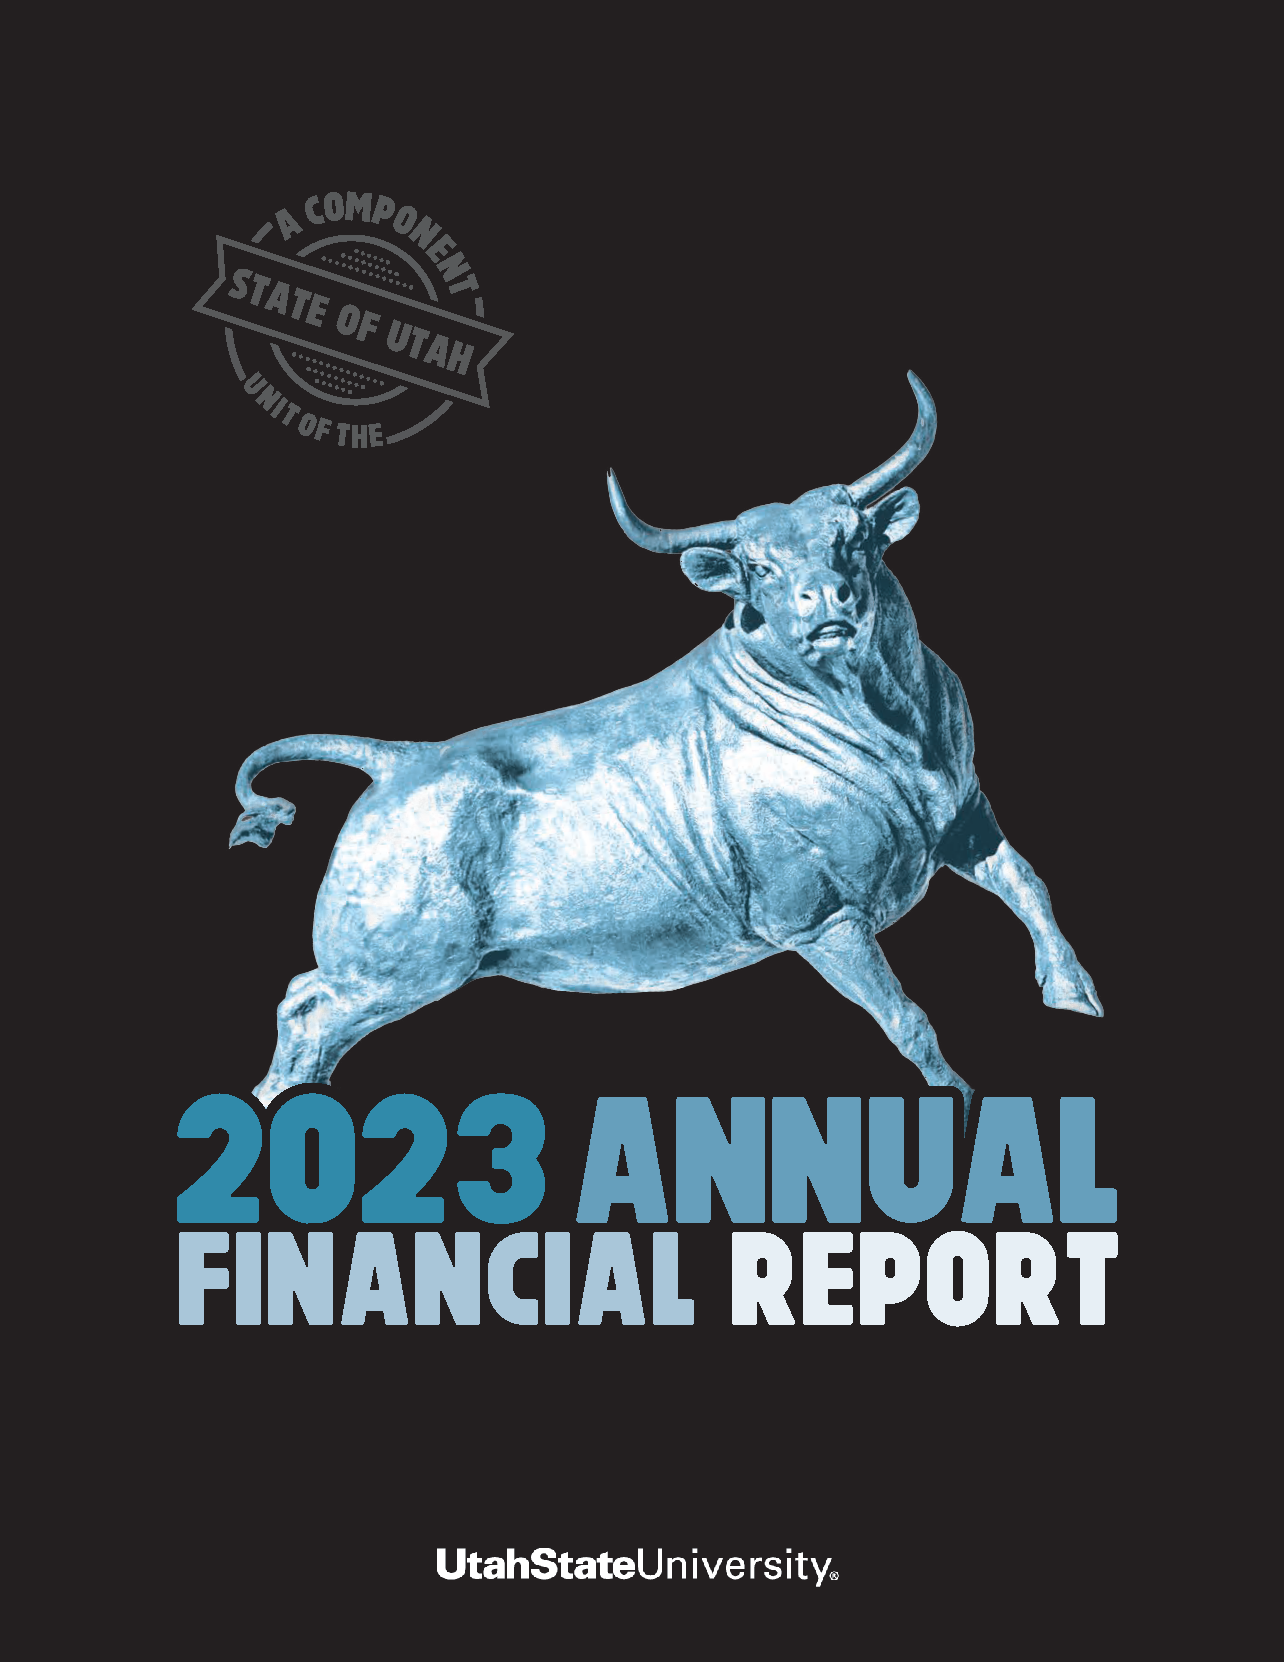 2023 Annual Financial Report